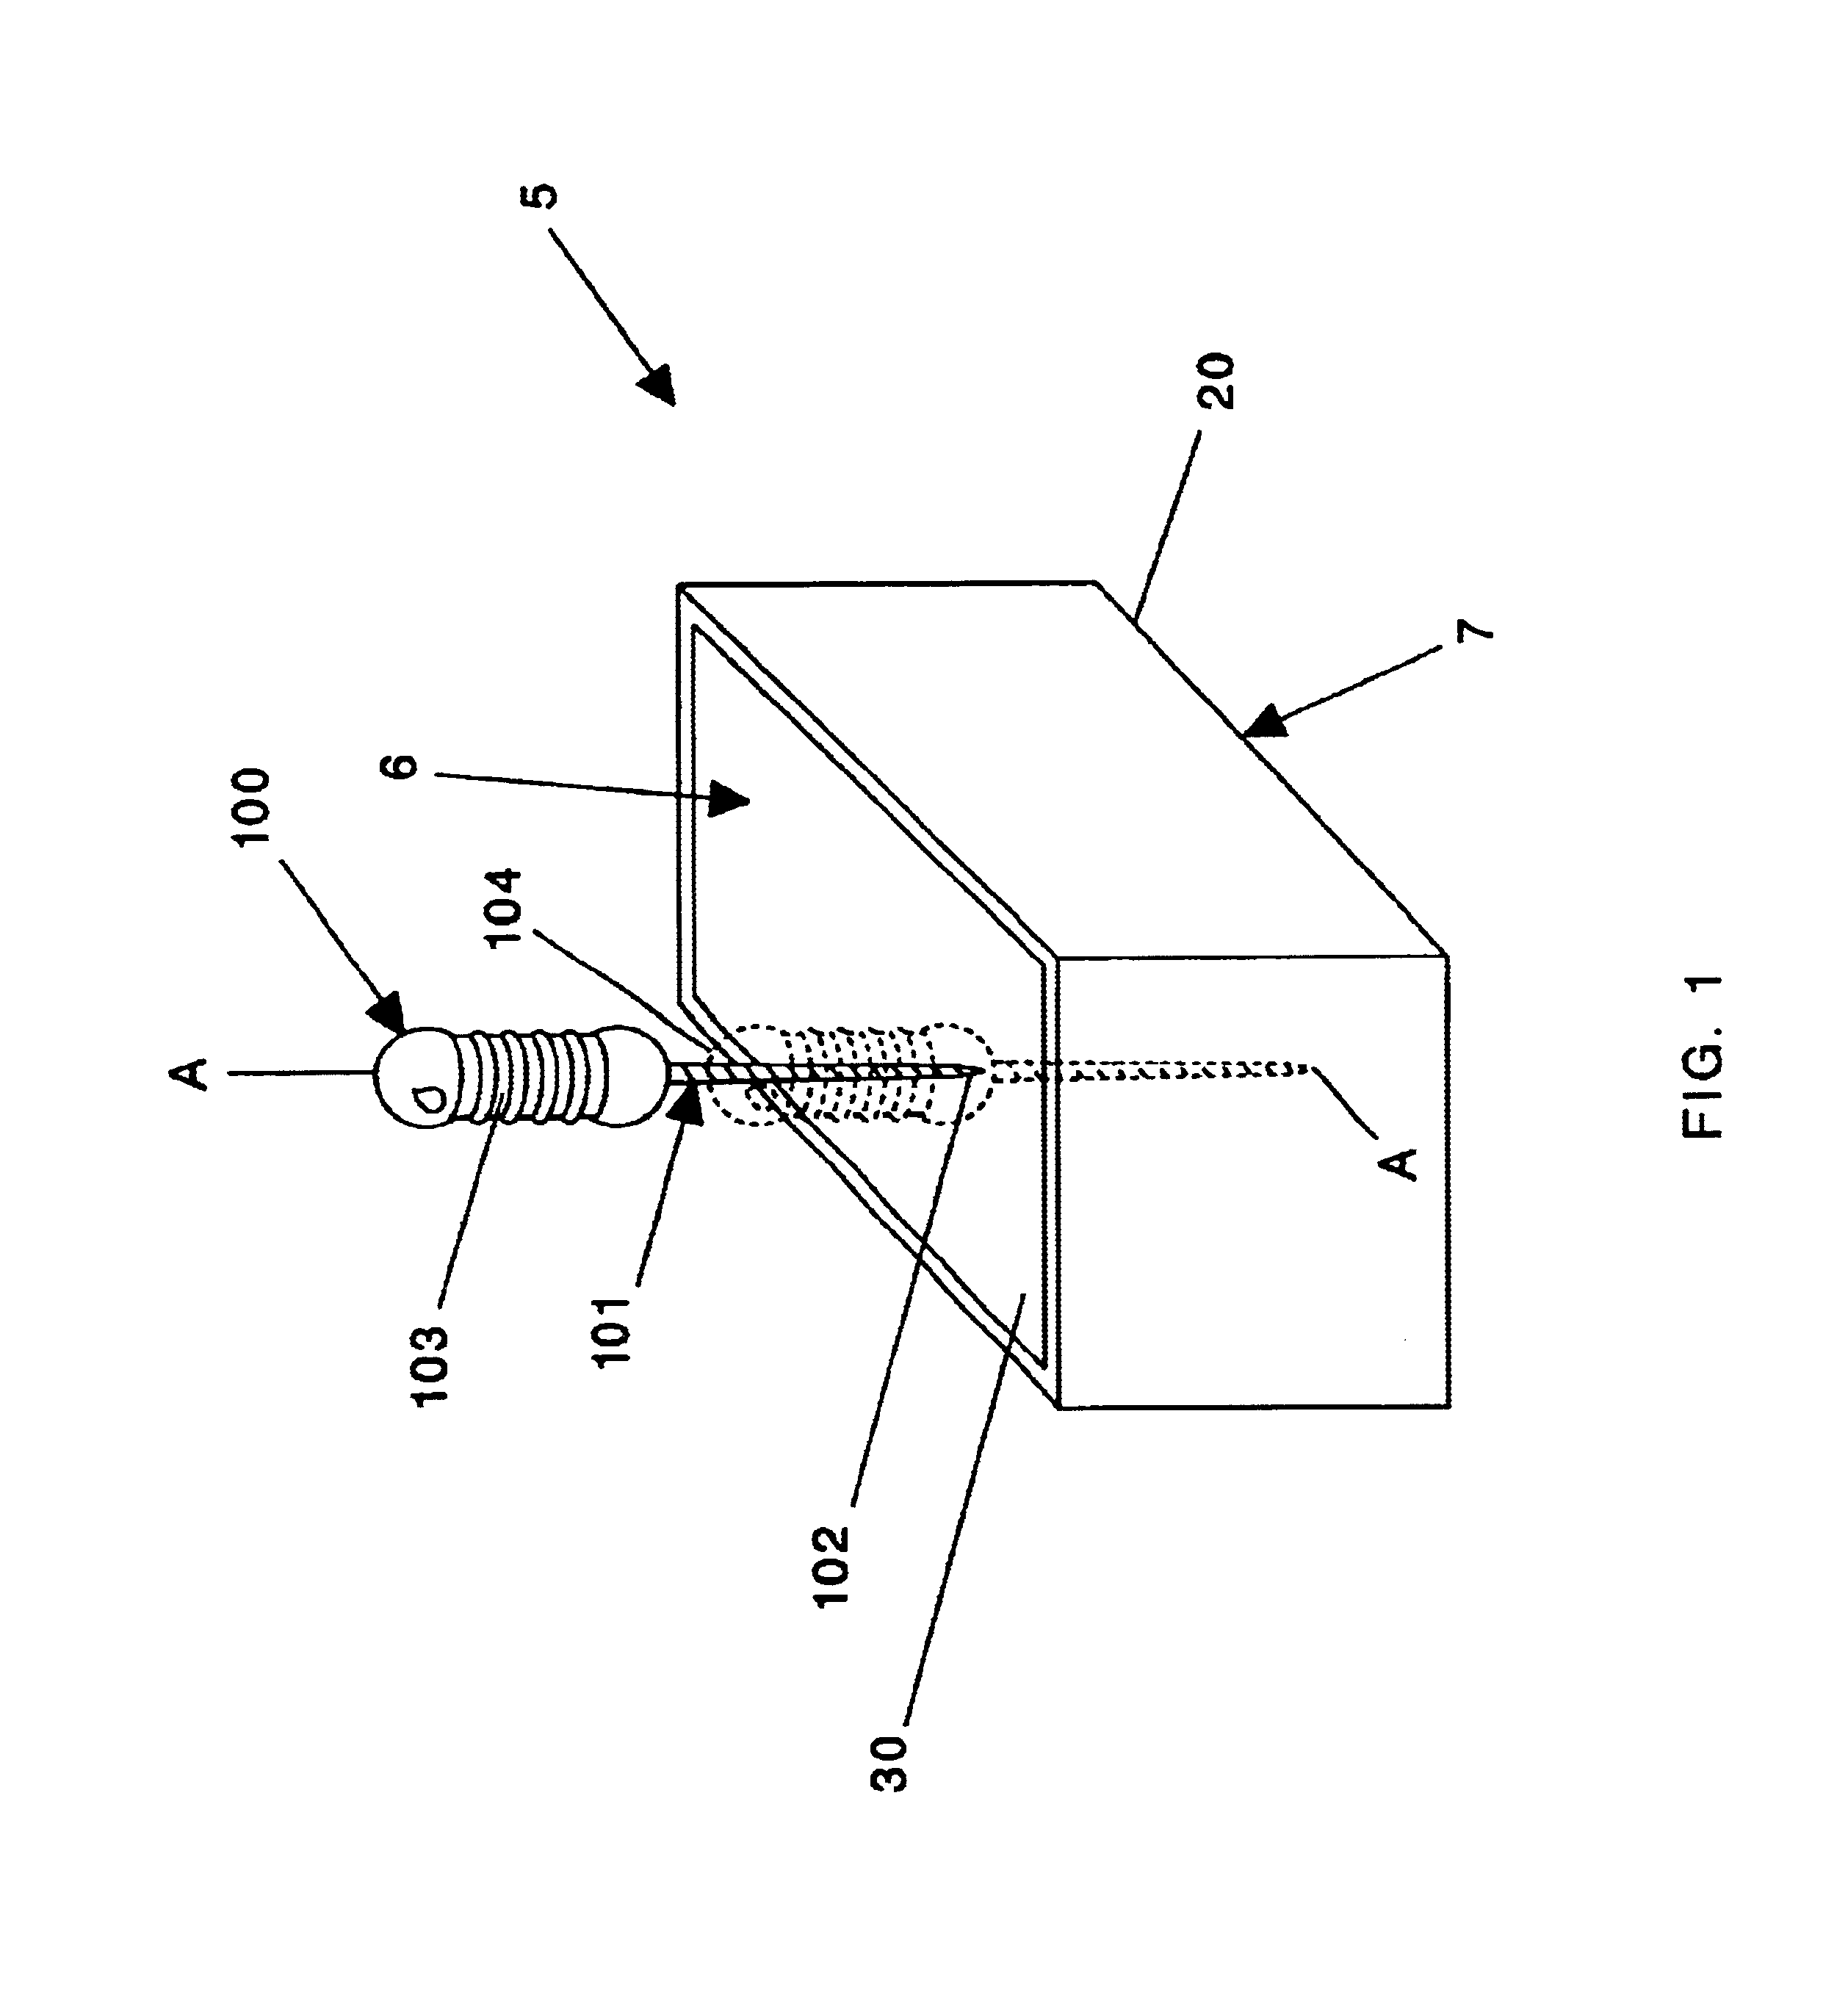 Device and method for cleaning and detecting fractures in files